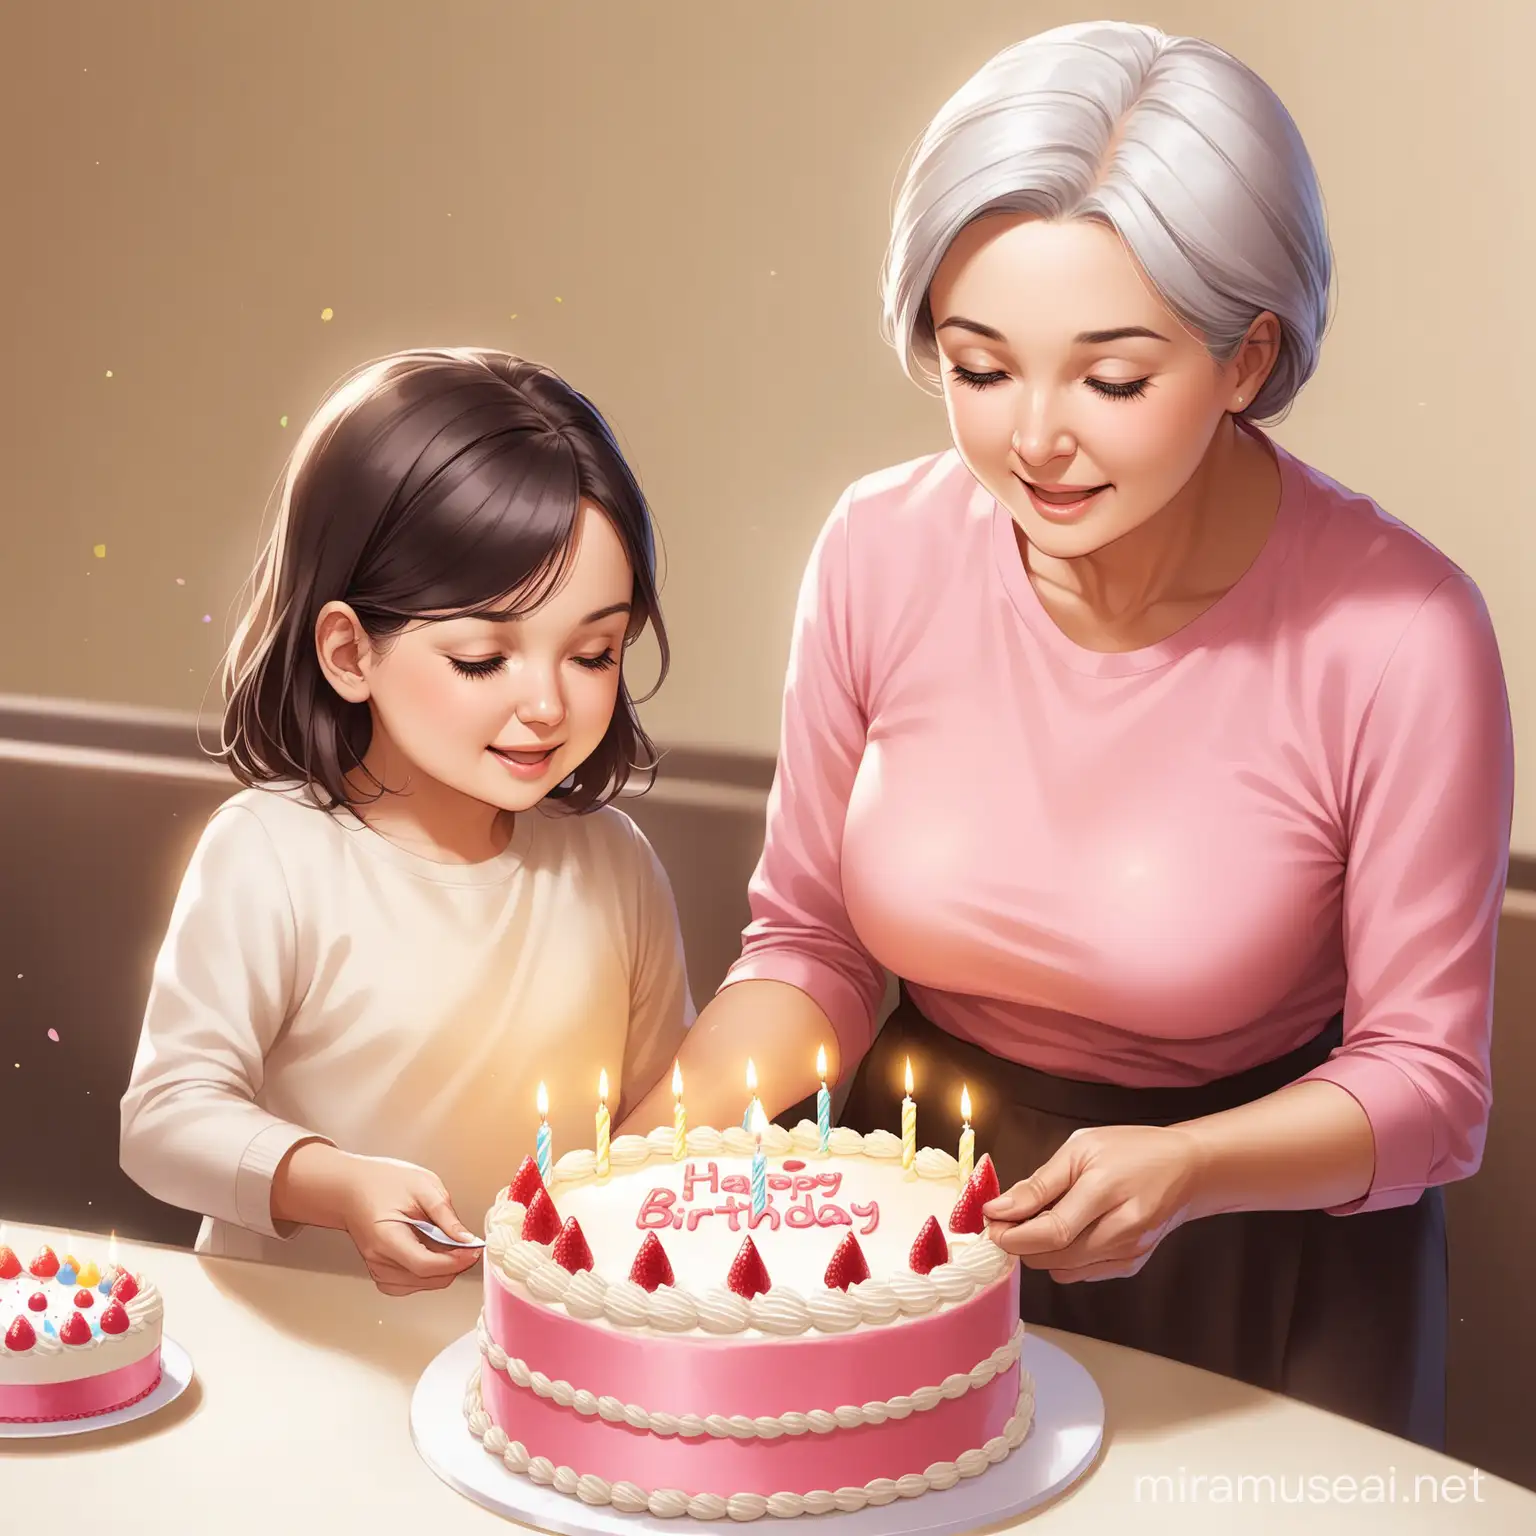 Mother and Daughter Preparing Birthday Cake Together